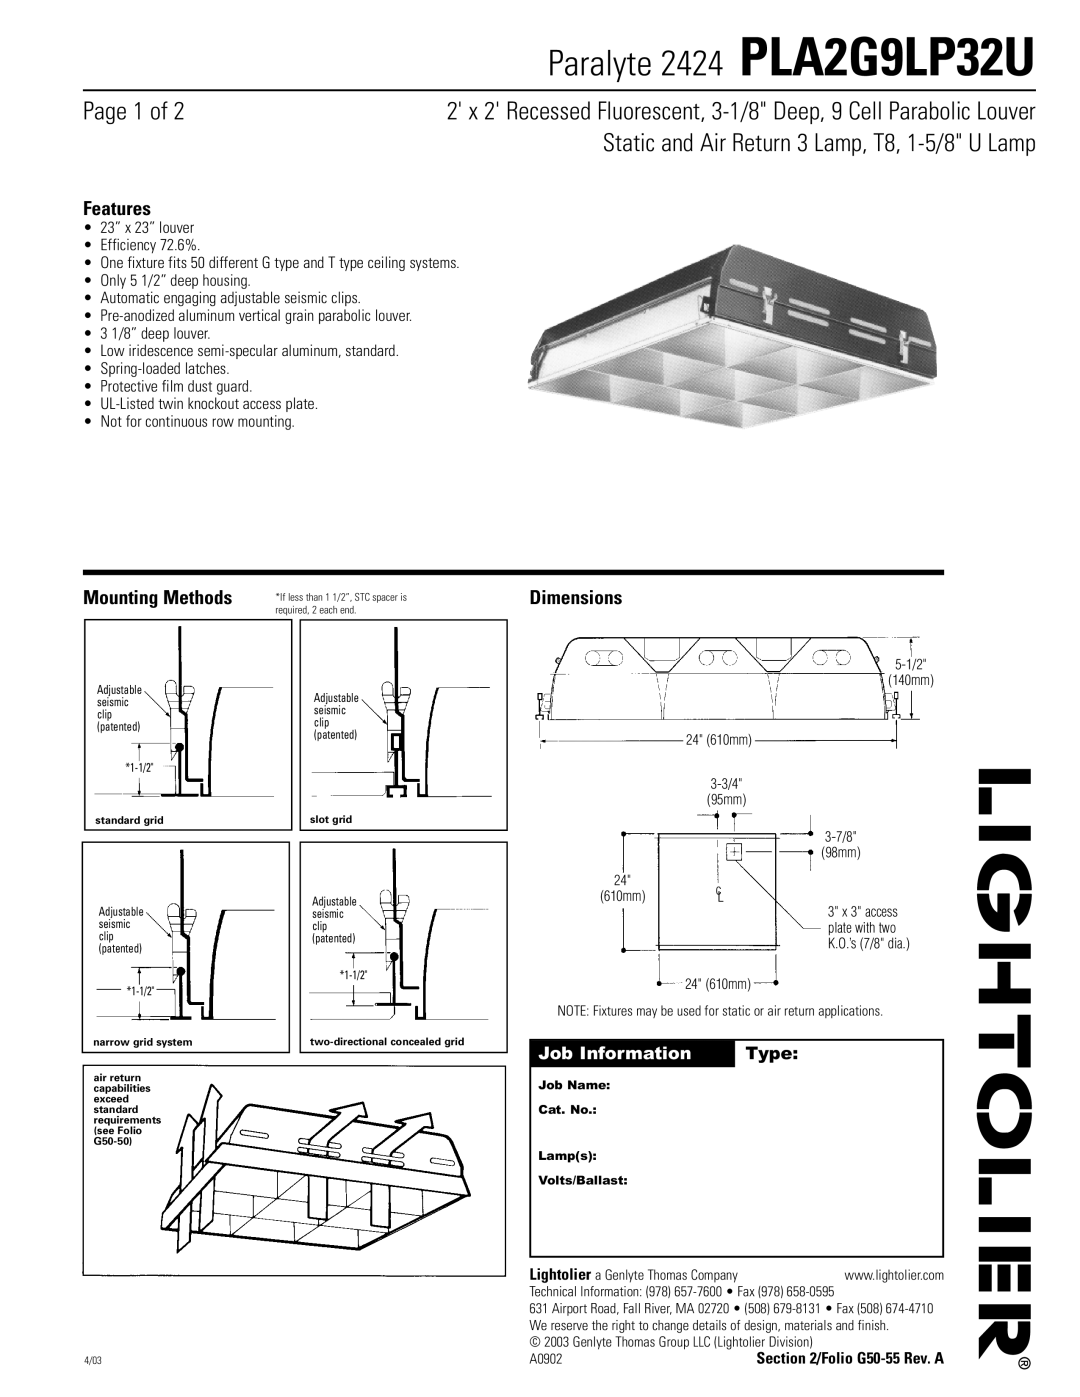 Lightolier dimensions Paralyte 2424 PLA2G9LP32U, Page 1 of, Static and Air Return 3 Lamp, T8, 1-5/8U Lamp, Features 